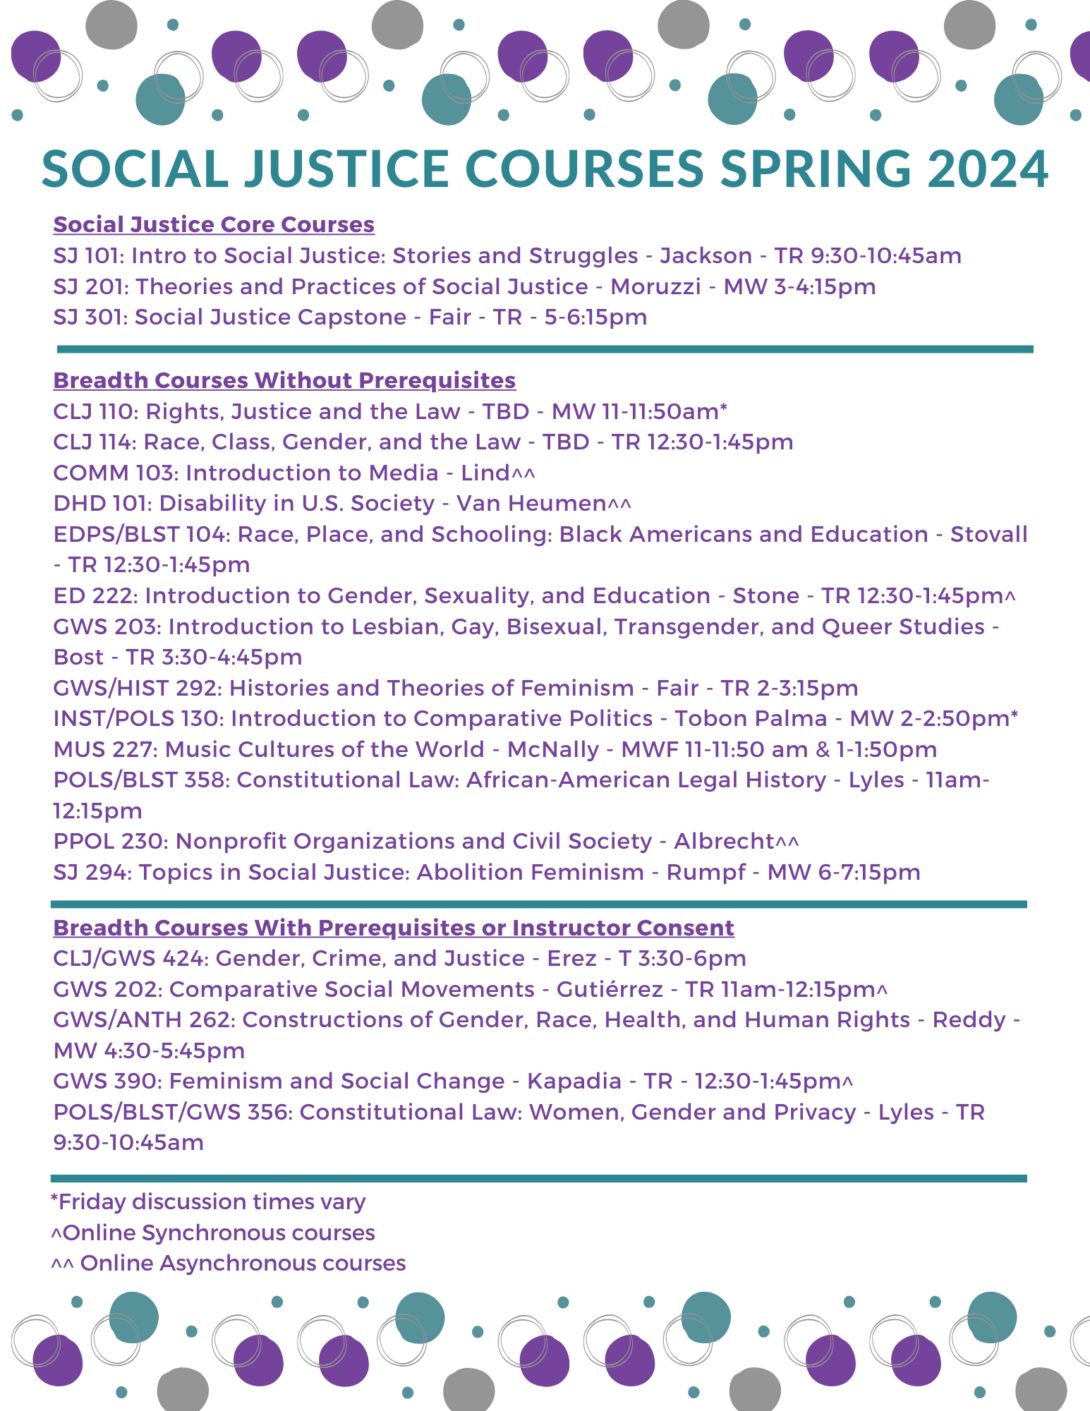 Small purple, gray, teal, and white circles form a border at the top and bottom of the flier. Social Justice courses are listed in teal and purple text.